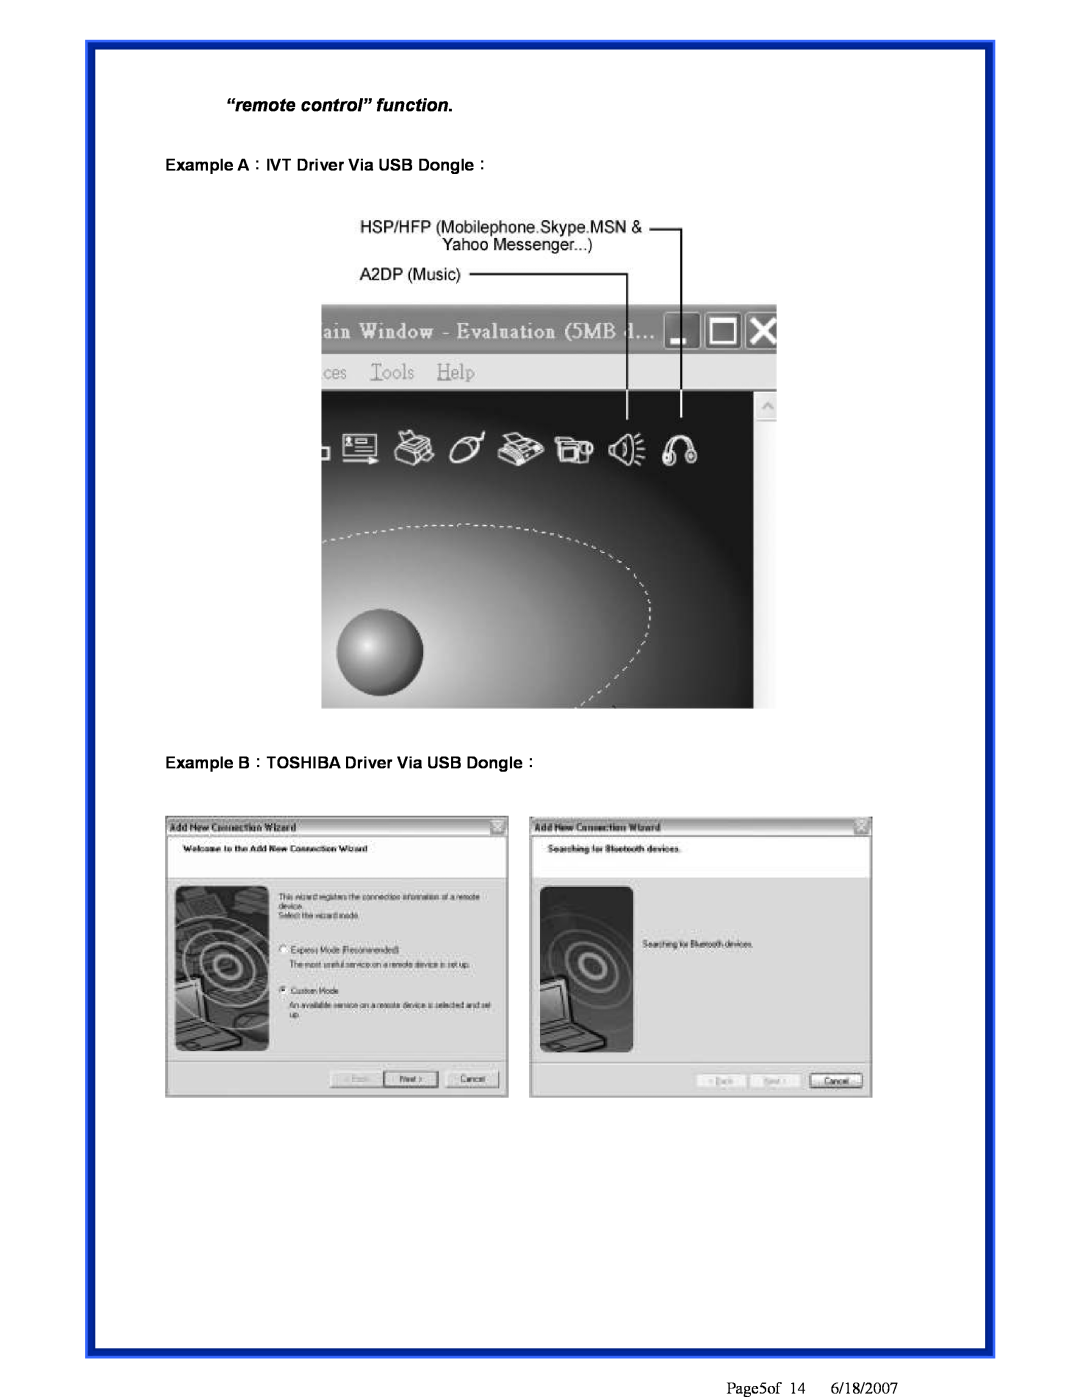 Advantek Networks ABT-SPK-A8 user manual “remote control” function, Page5of 14 6/18/2007 